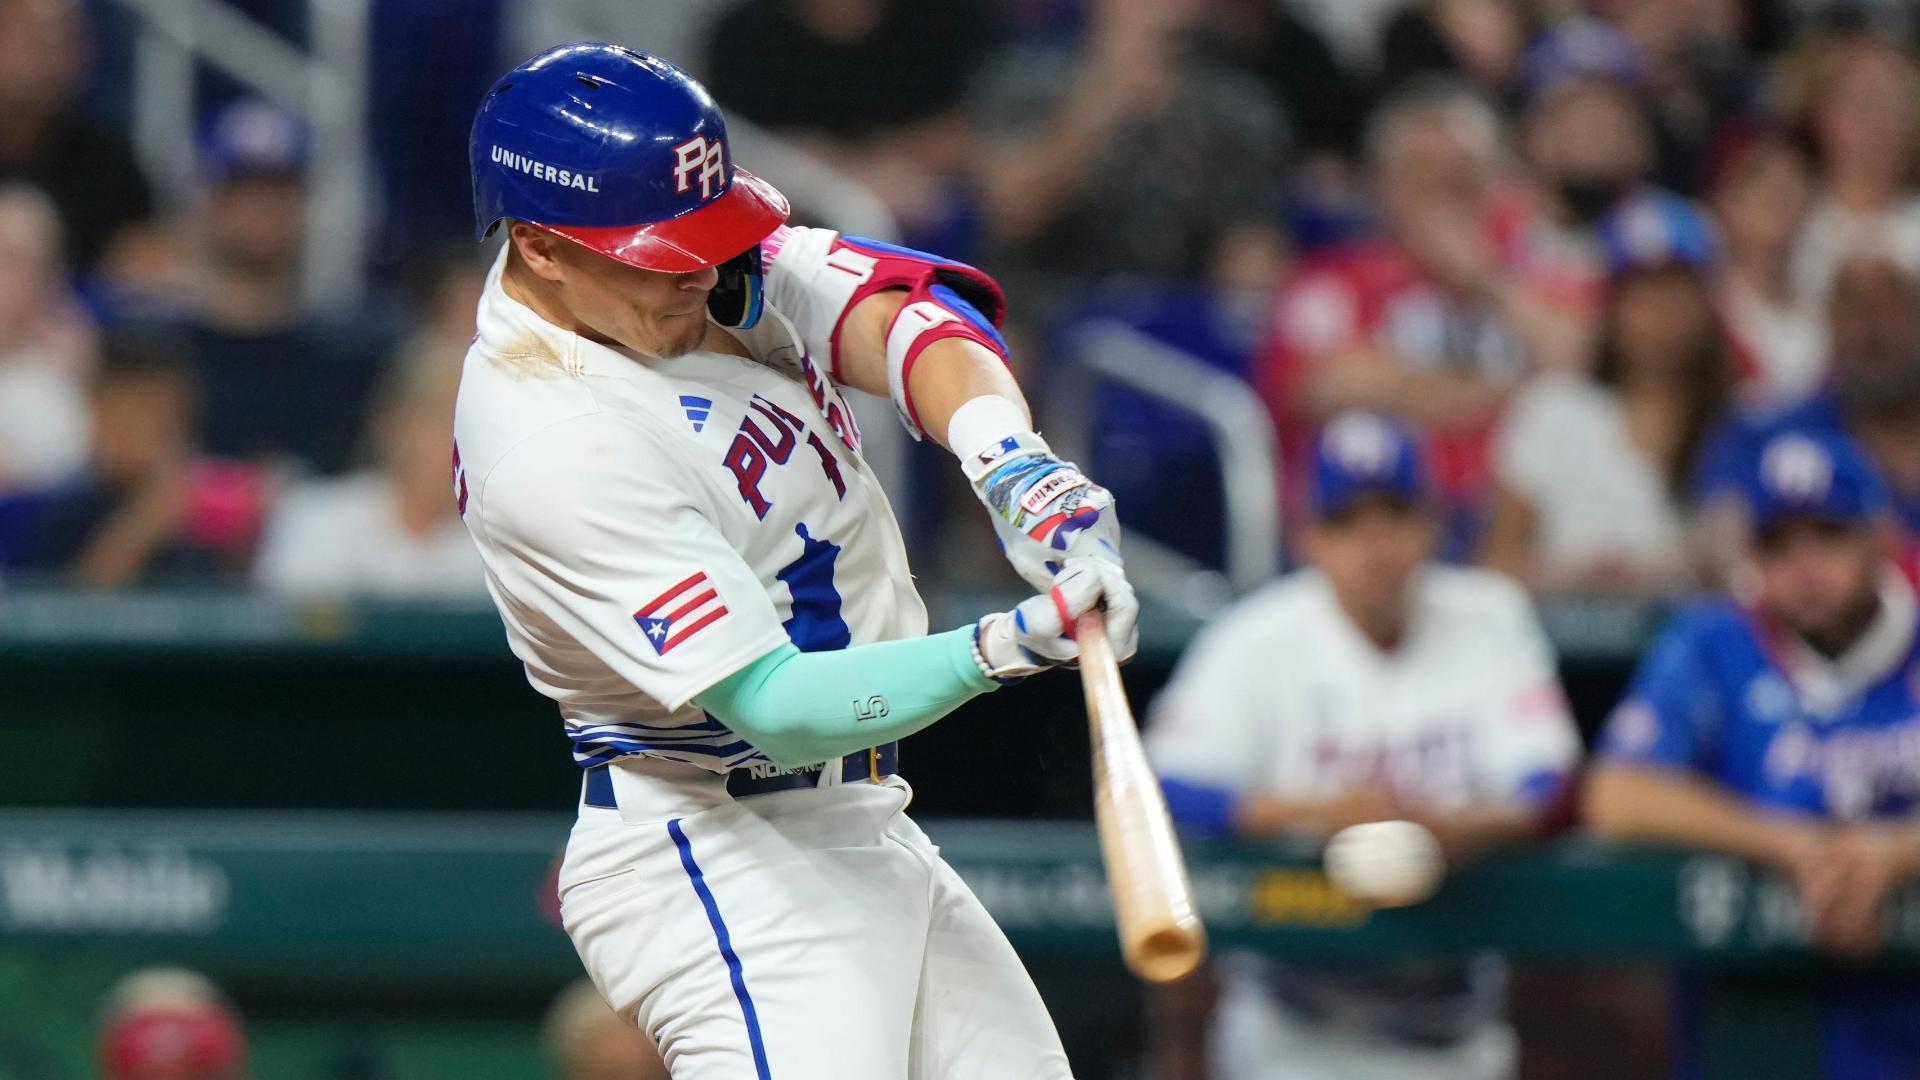 U.S. routs Canada in WBC; Puerto Rico pitchers perfect - The San